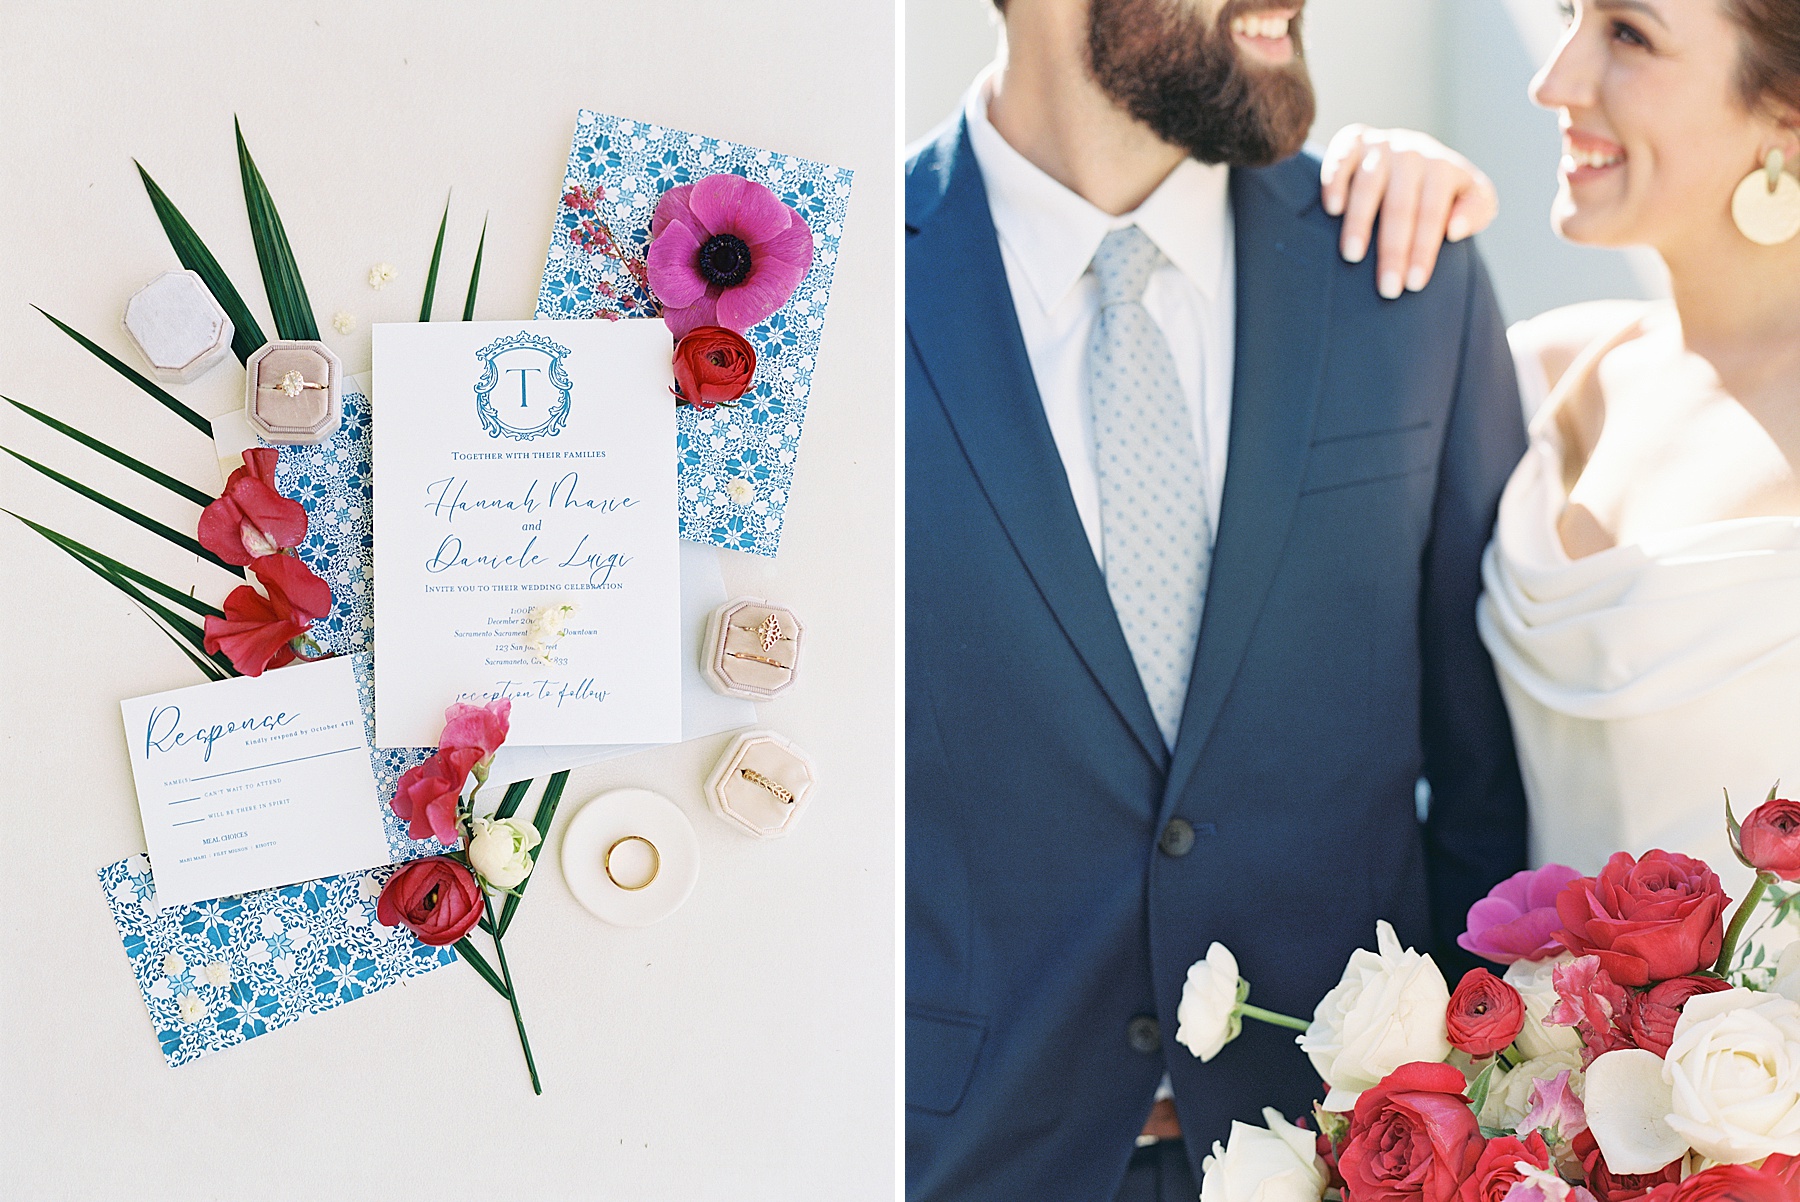 Grecian Inspired Micro-Wedding with Events by Kristina Elyse - Ash Baumgartner - Inspired by This - Sonoma Wedding Photographer_0031.jpg